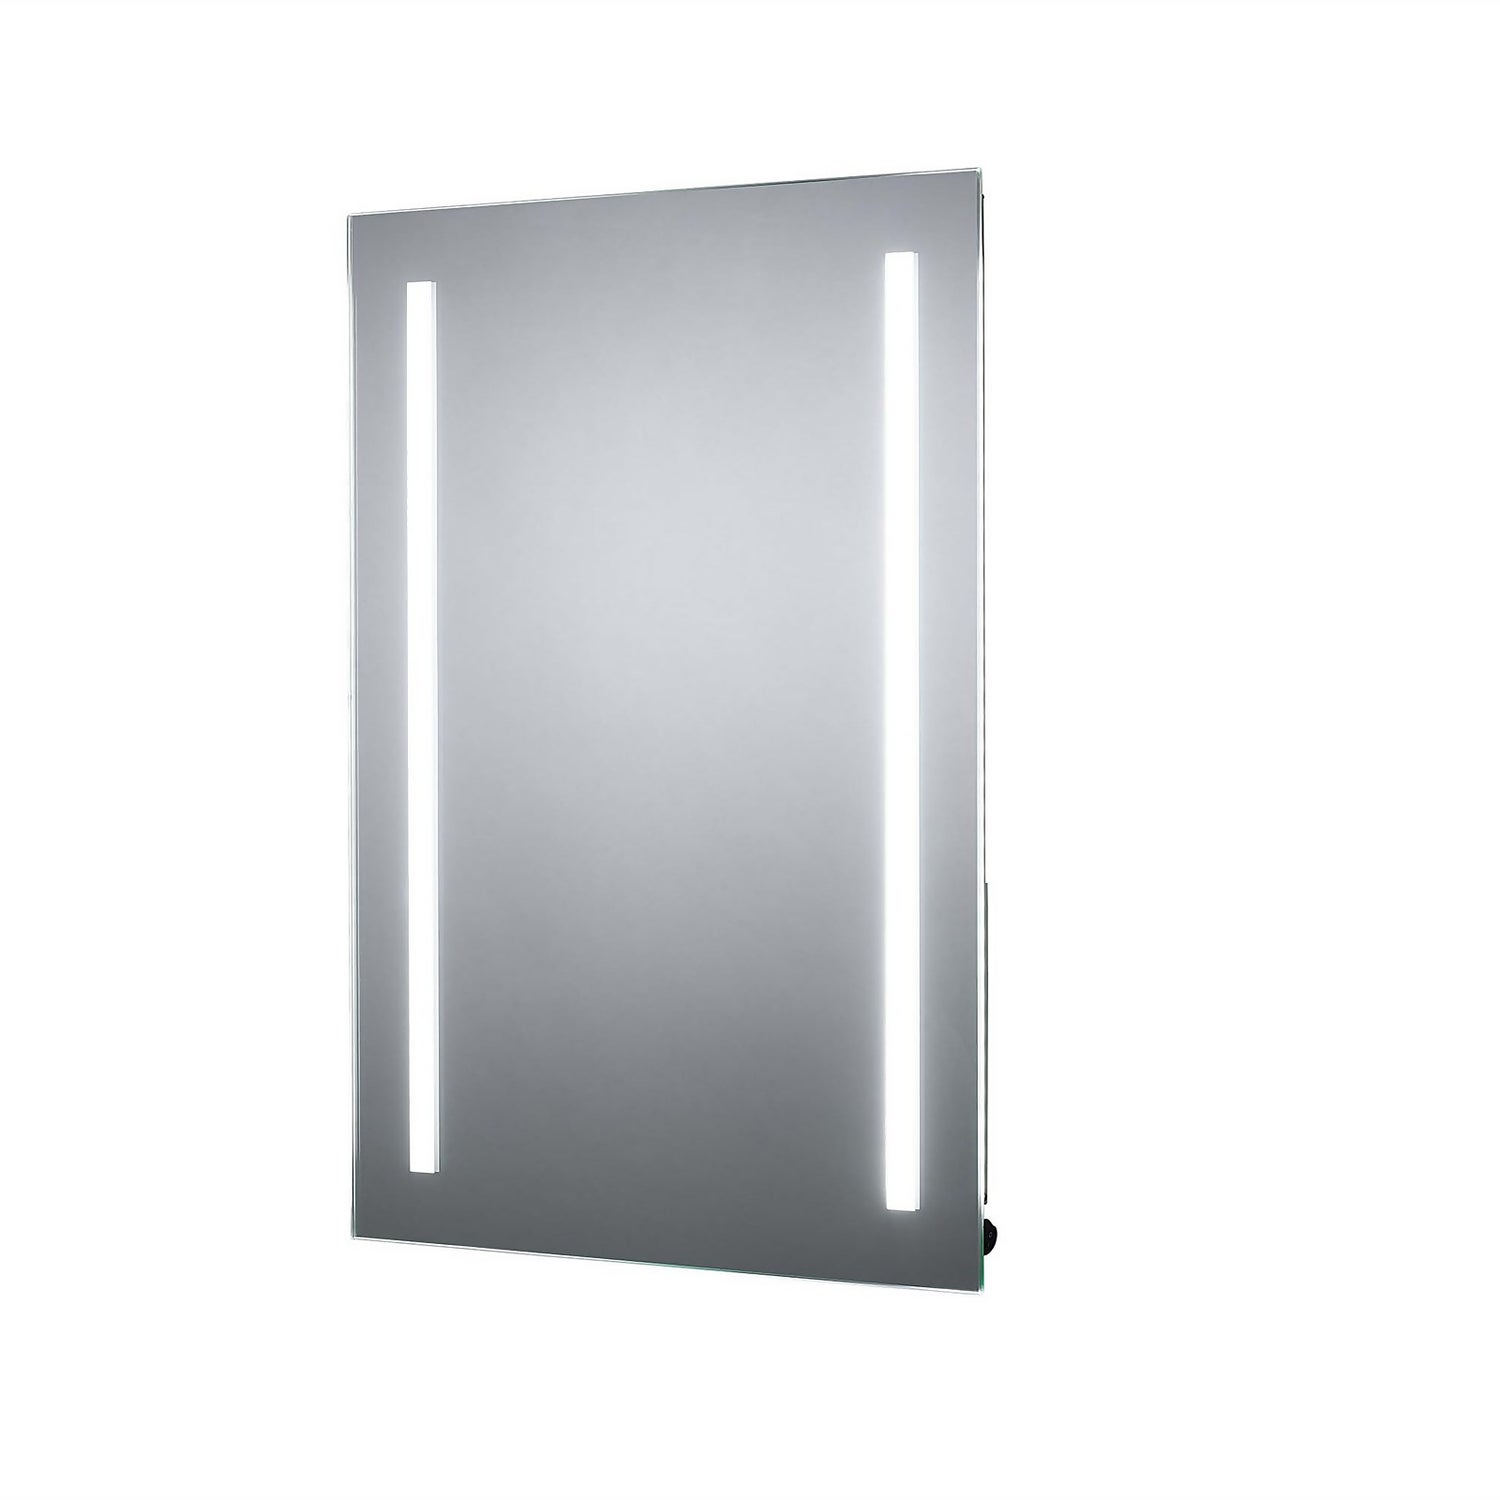 Ceres Battery Operated LED Mirror 500x700mm